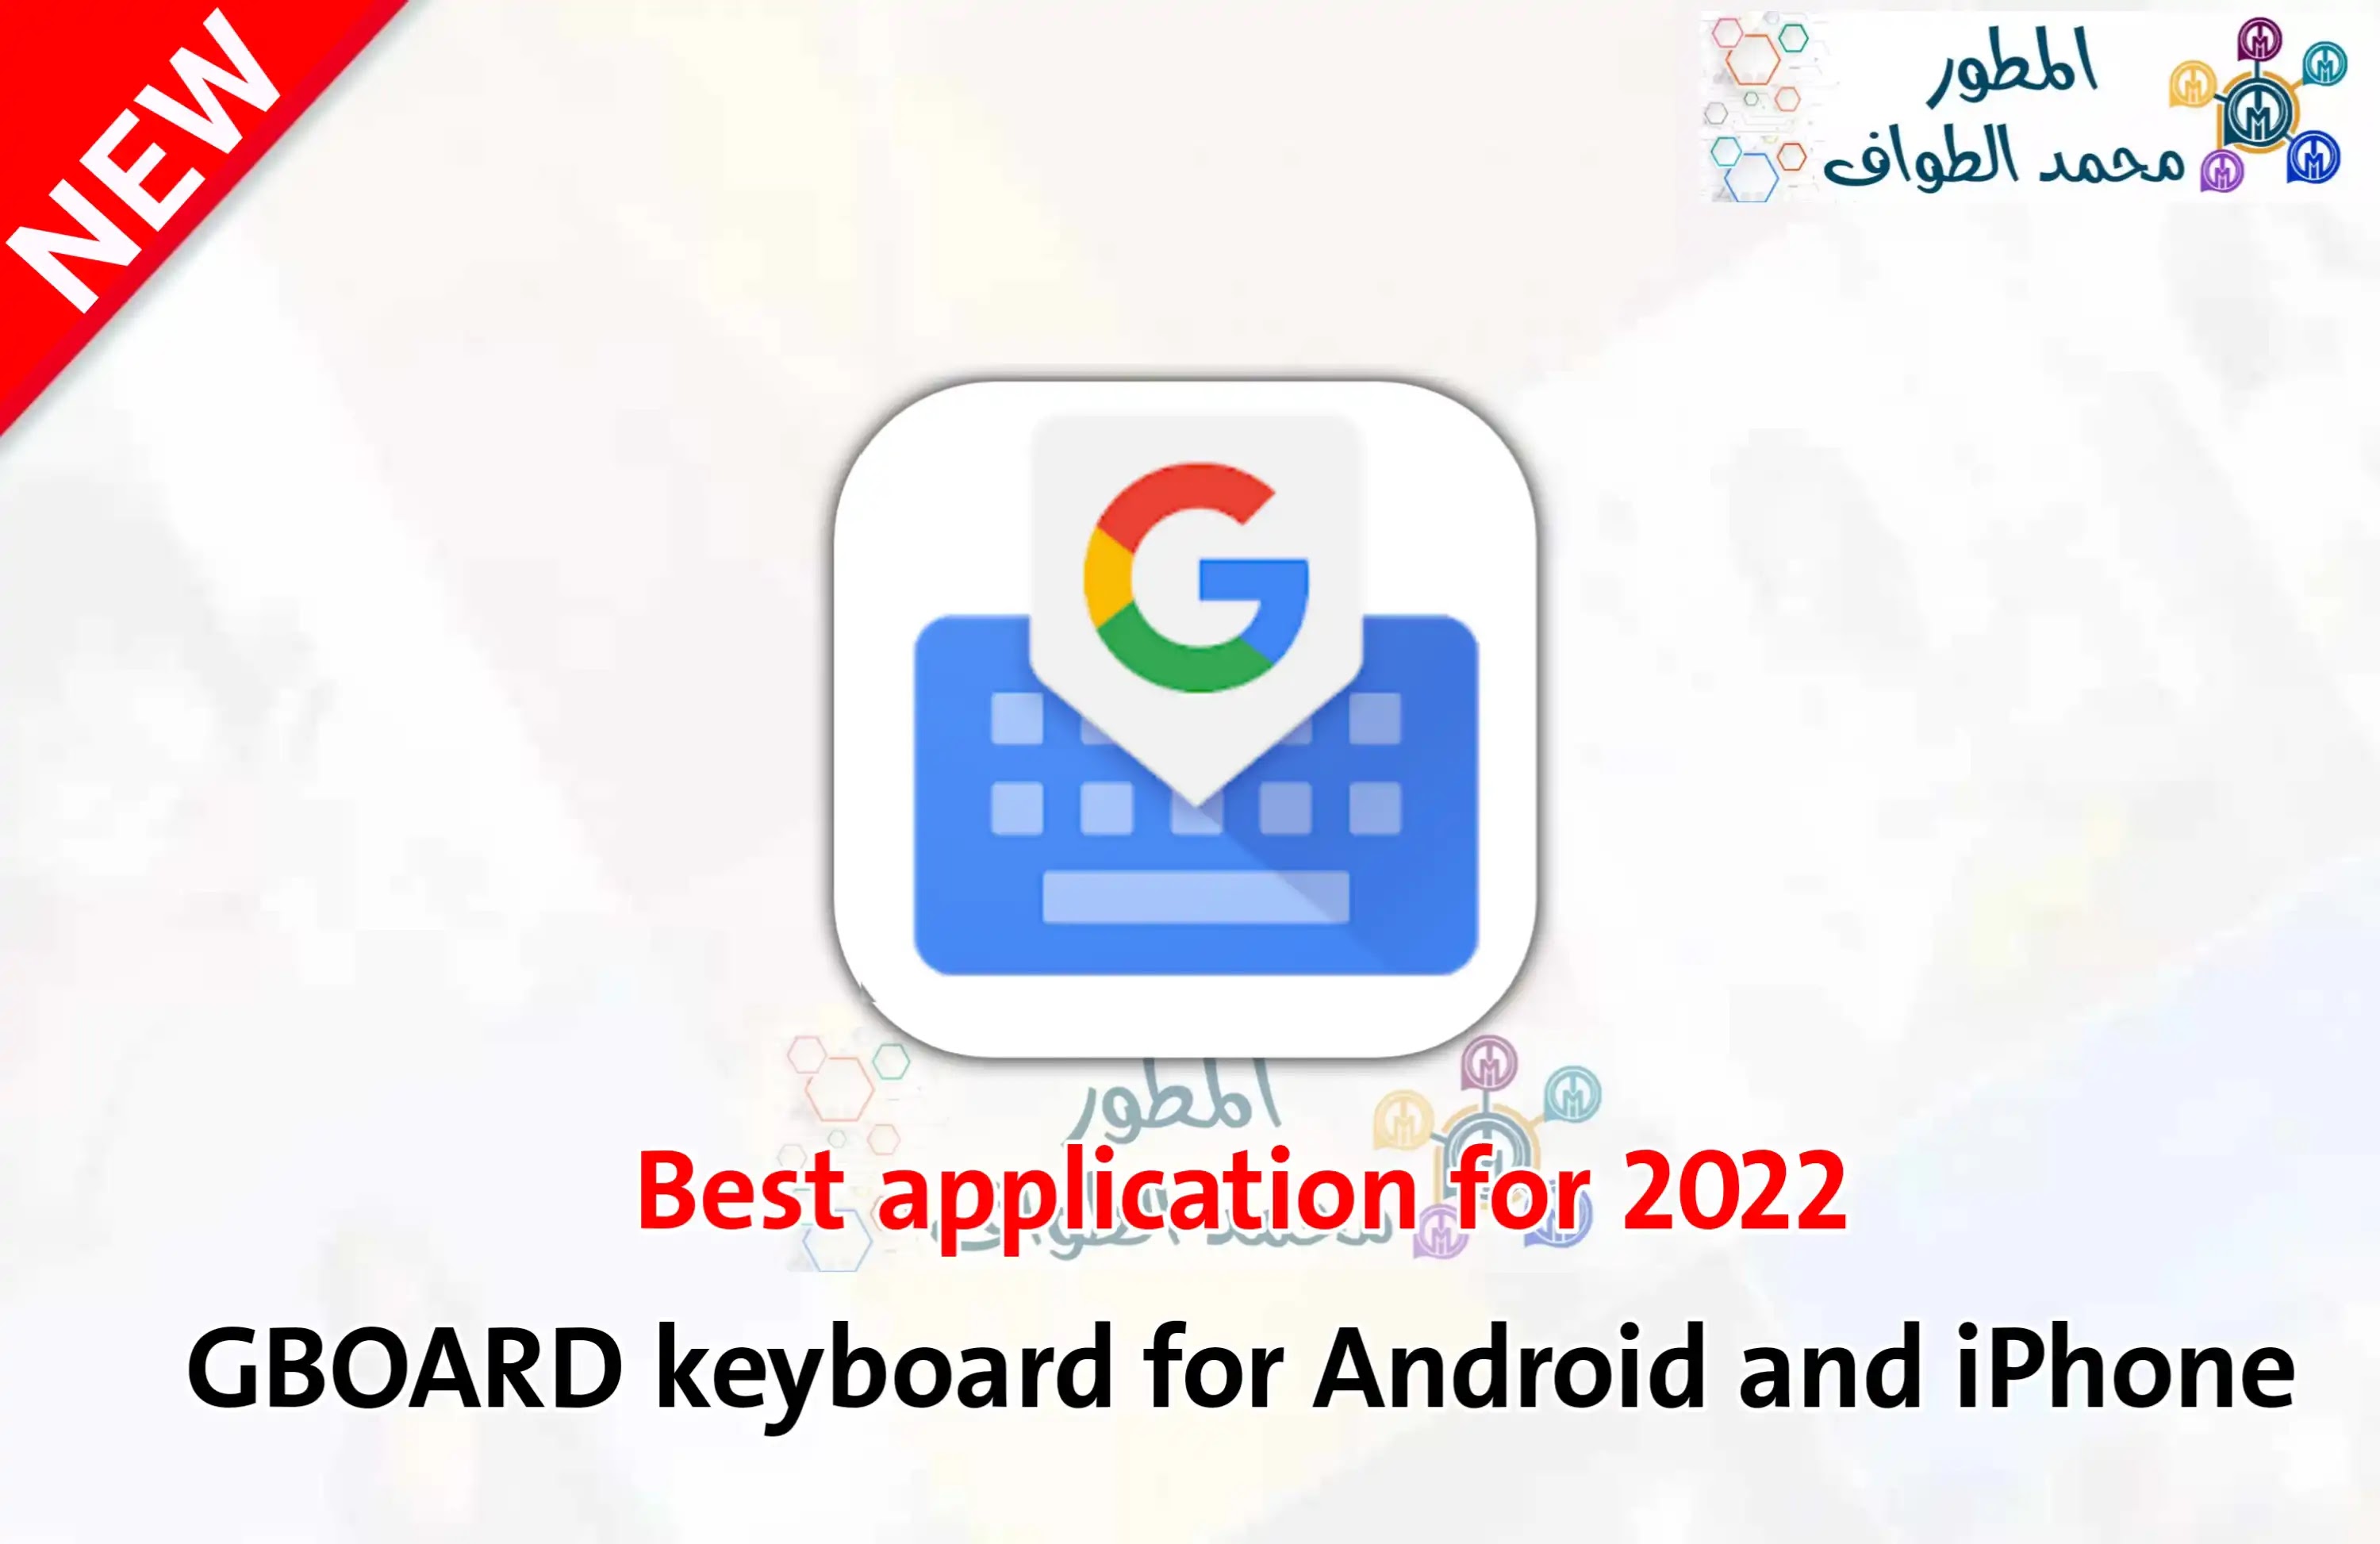 Download the best Gboard keyboard for Android and iPhone from Google Google 2022